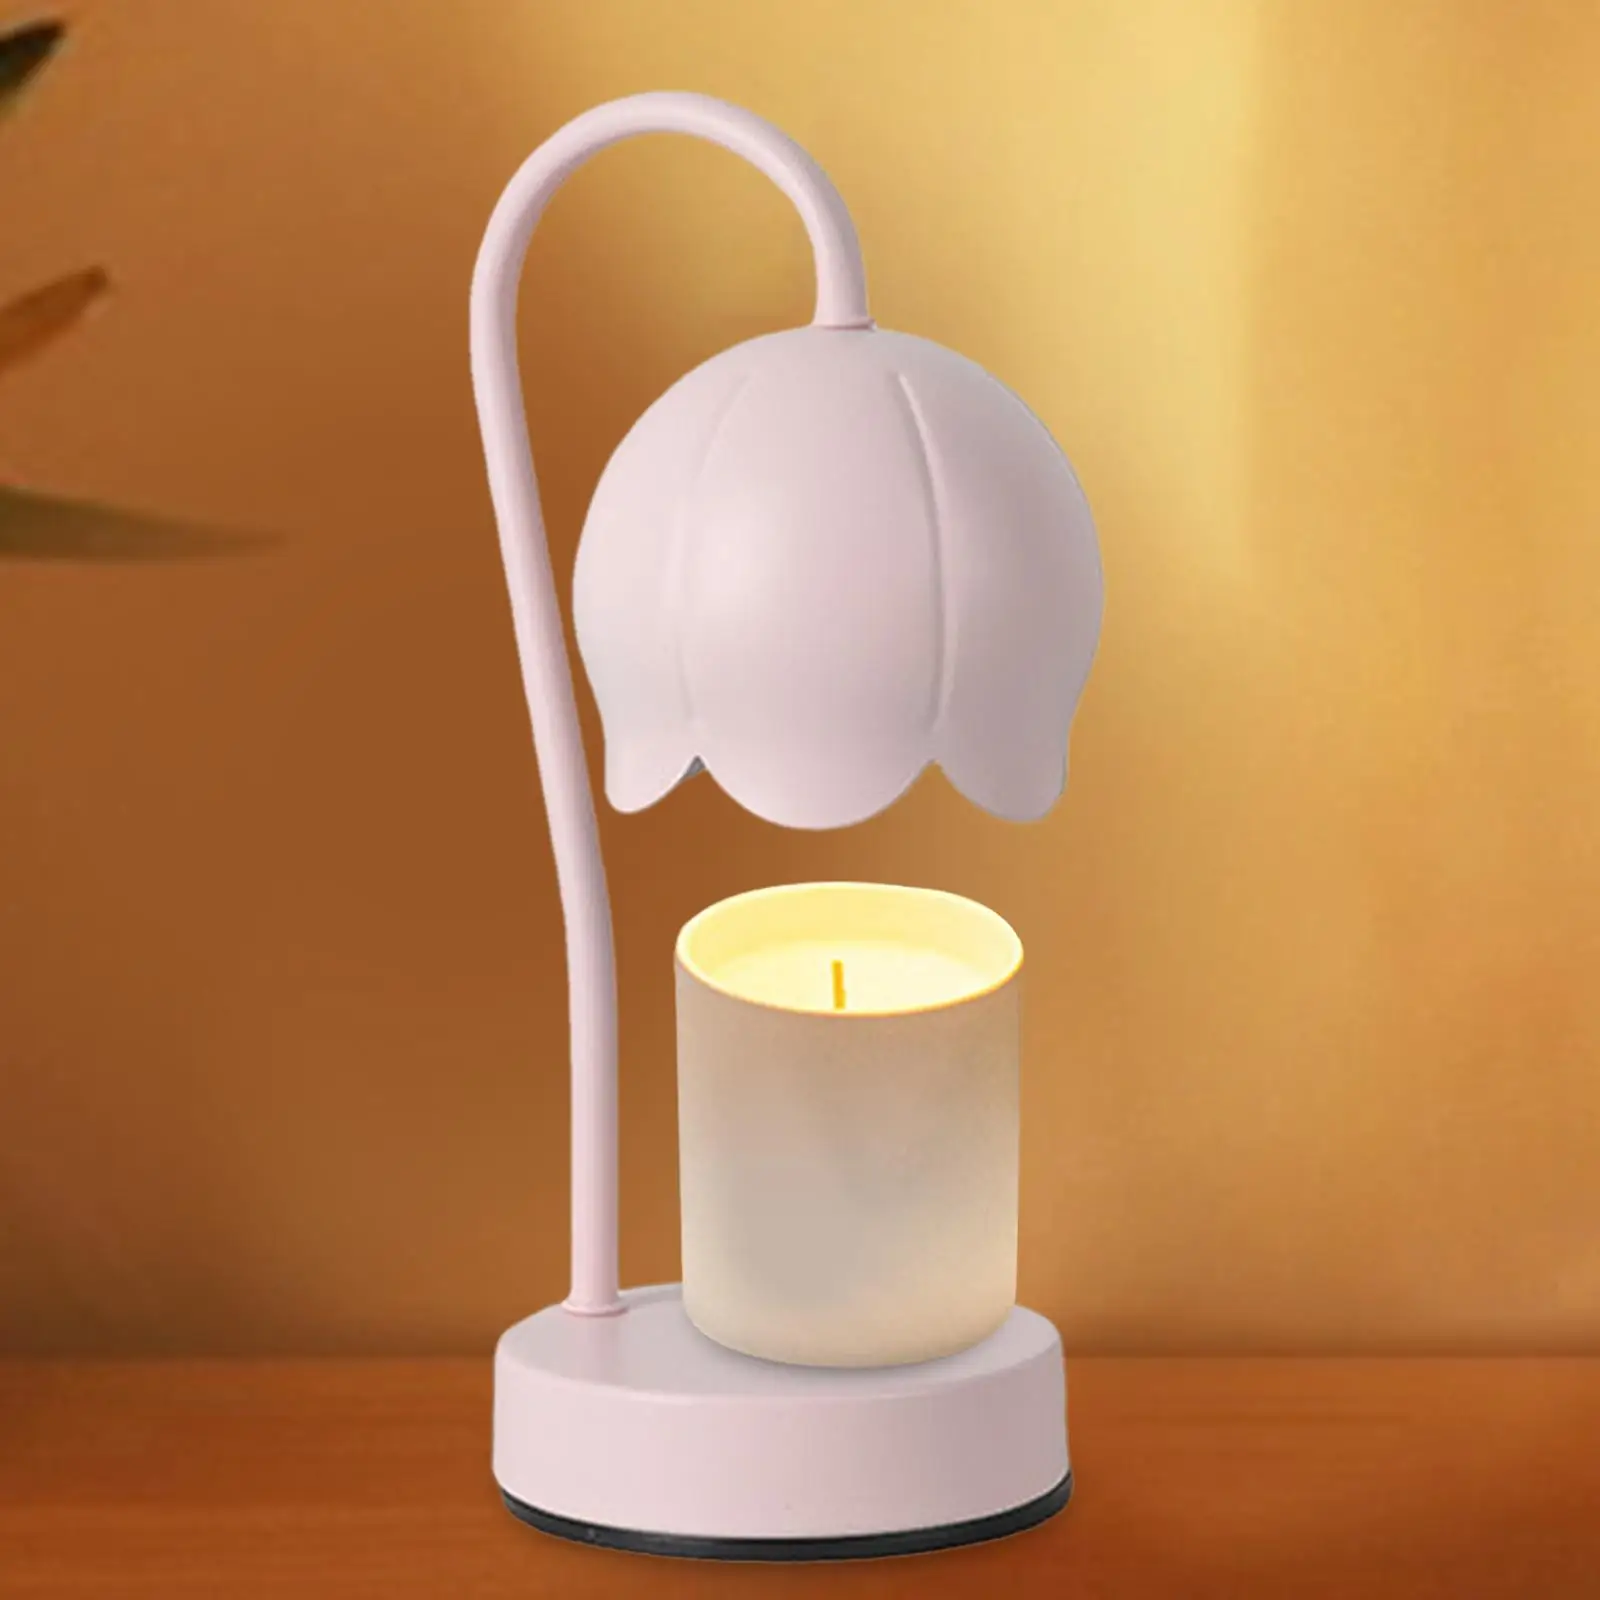 No Flame Candle Warmer Lamp Dimmable Metal Ornament Desk Light for Scented Candles with 2 Bulbs Candle Melter for Hotel Desk